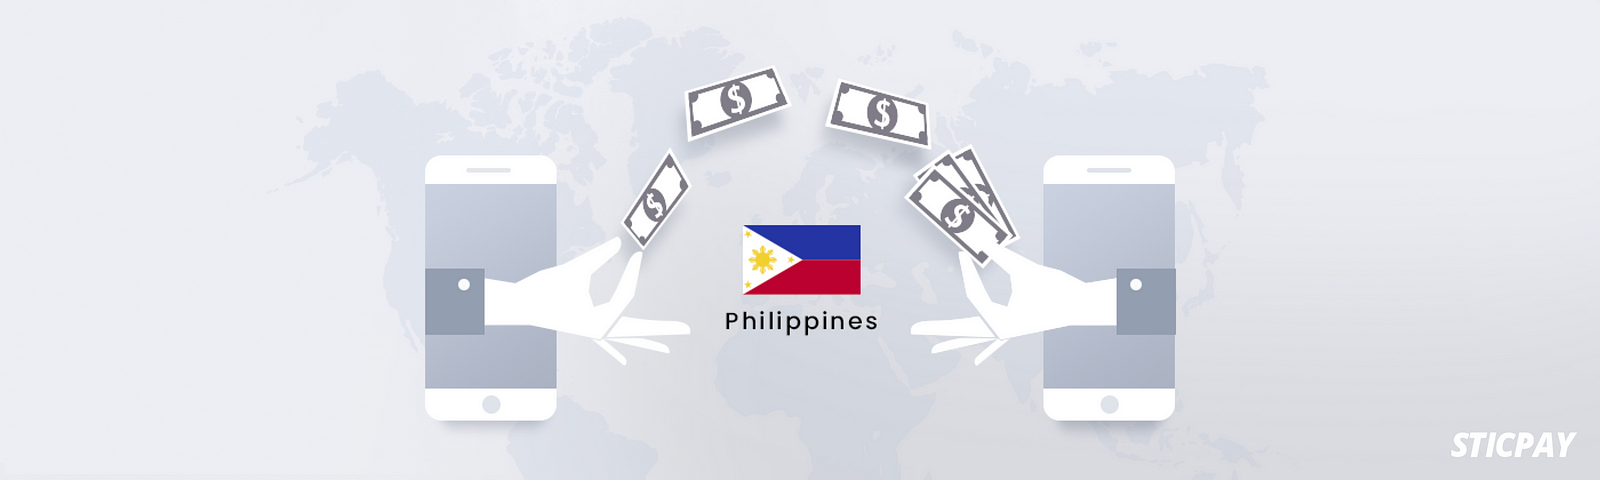 International money transfer policy: The Philippines